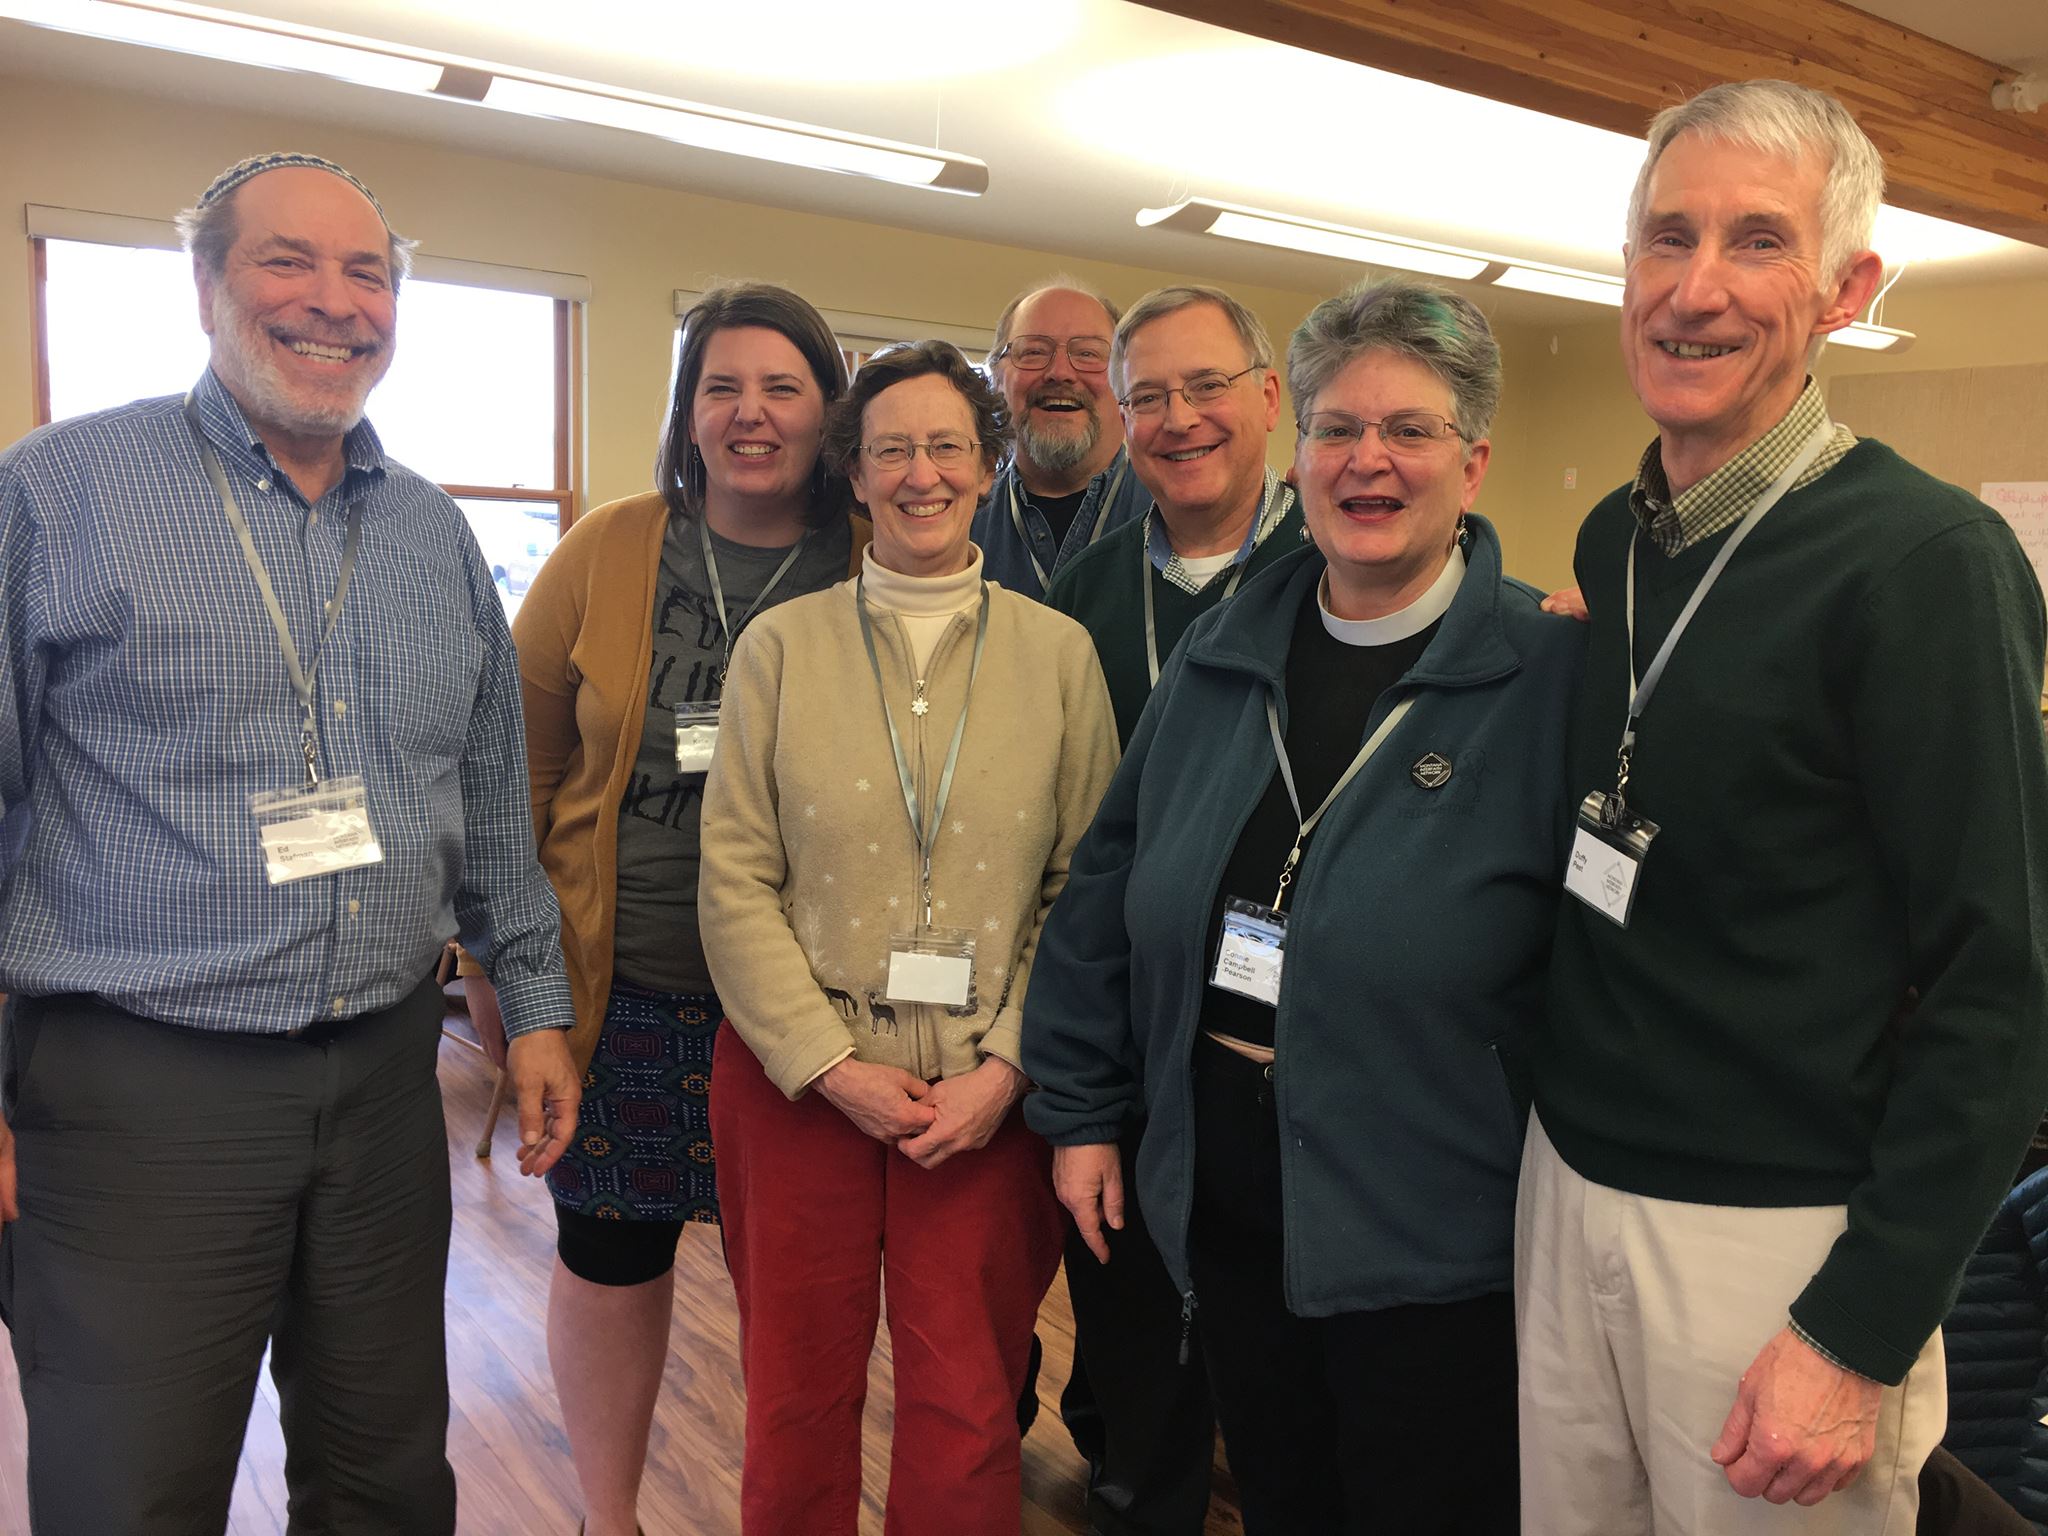 With interfaith friends at the Montana Interfaith network conference.